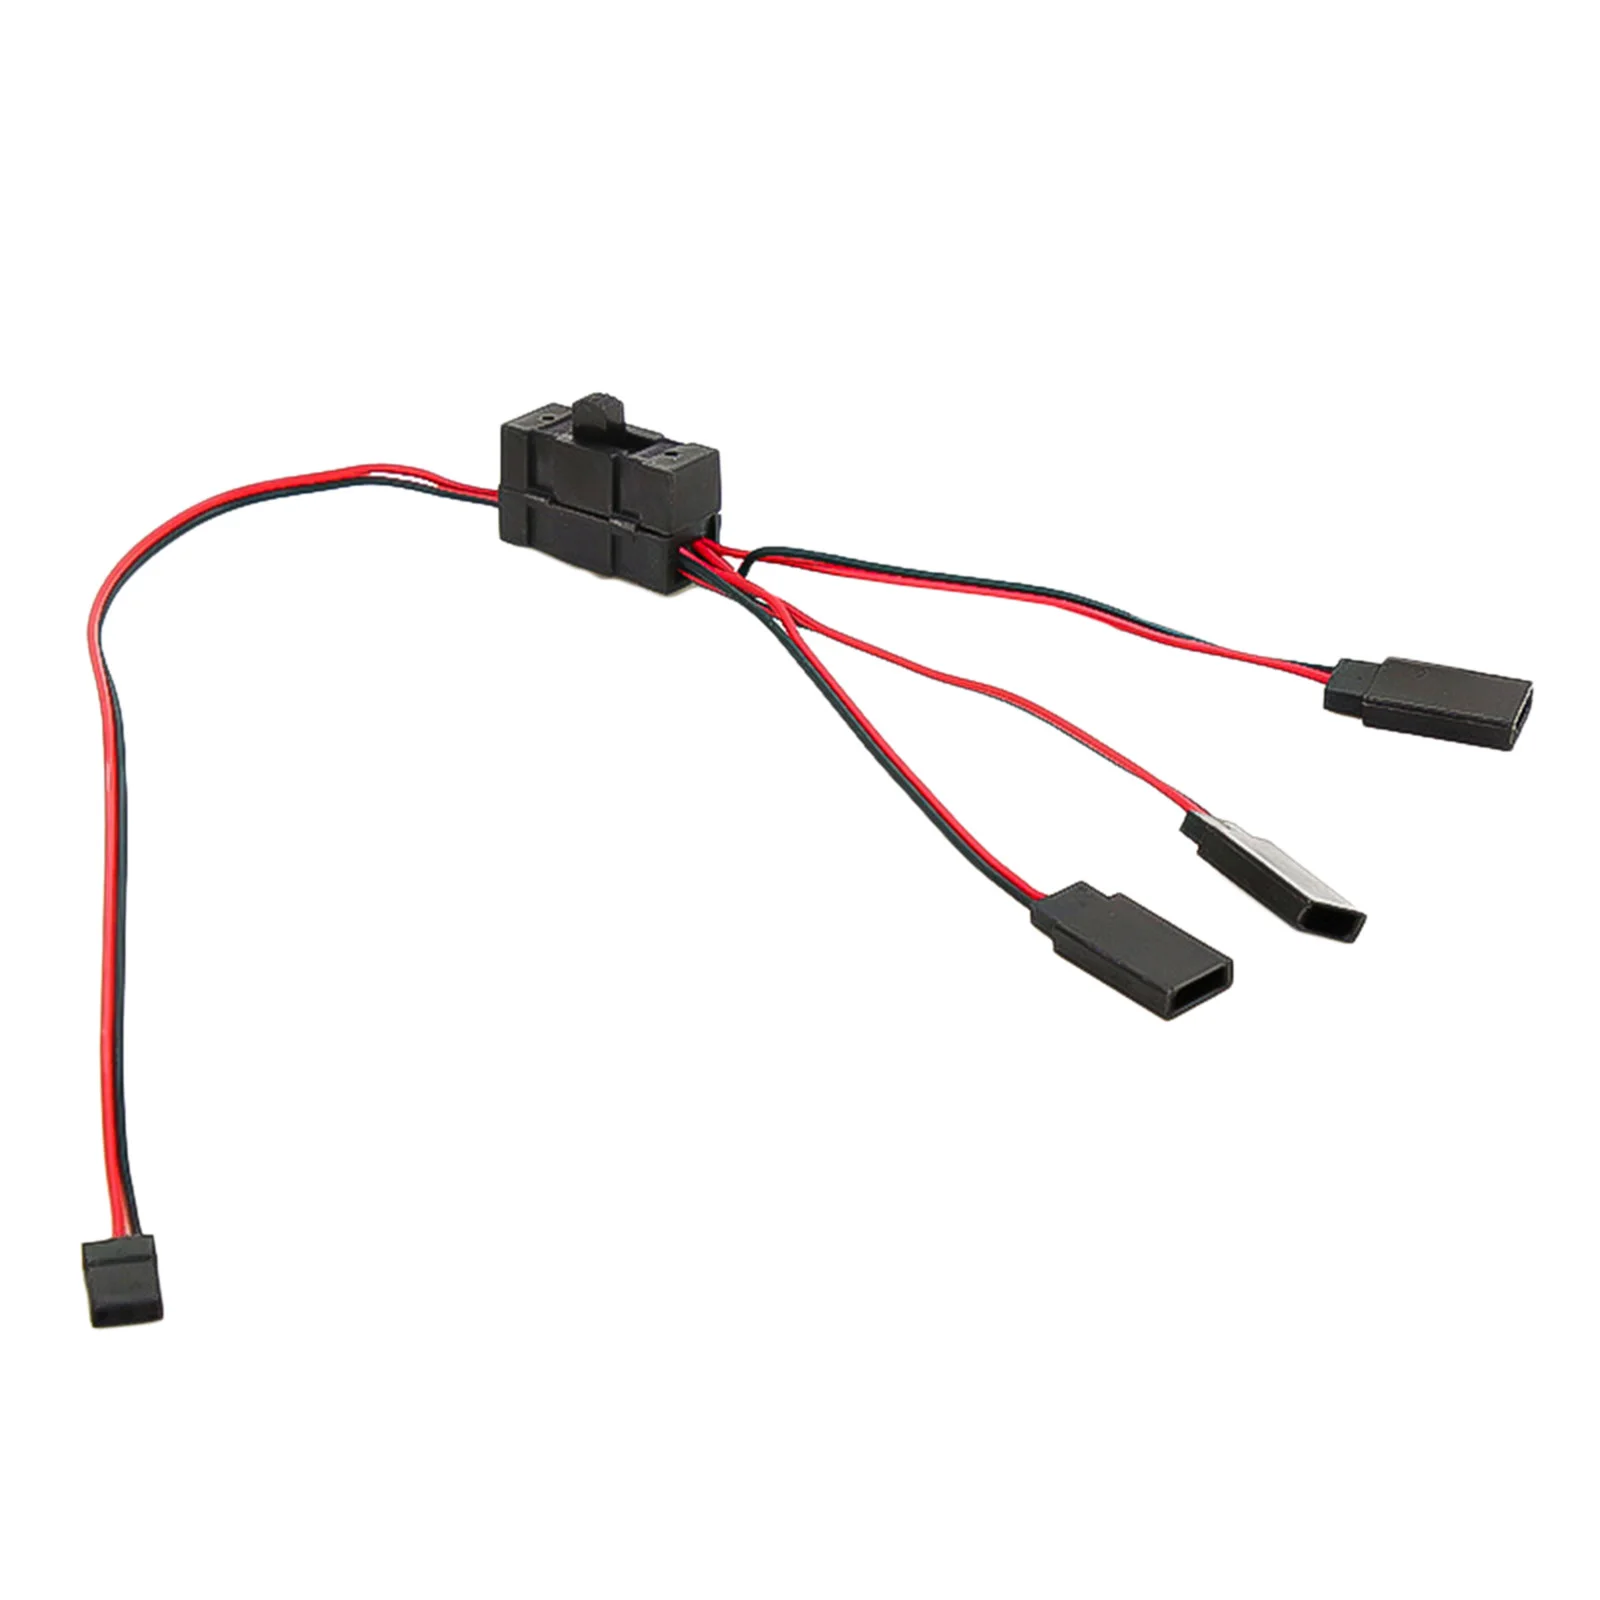 RC Servo Extension 1 to 3 Y Wire Cable LED Light Control Power Switch for JR Futaba RC Model